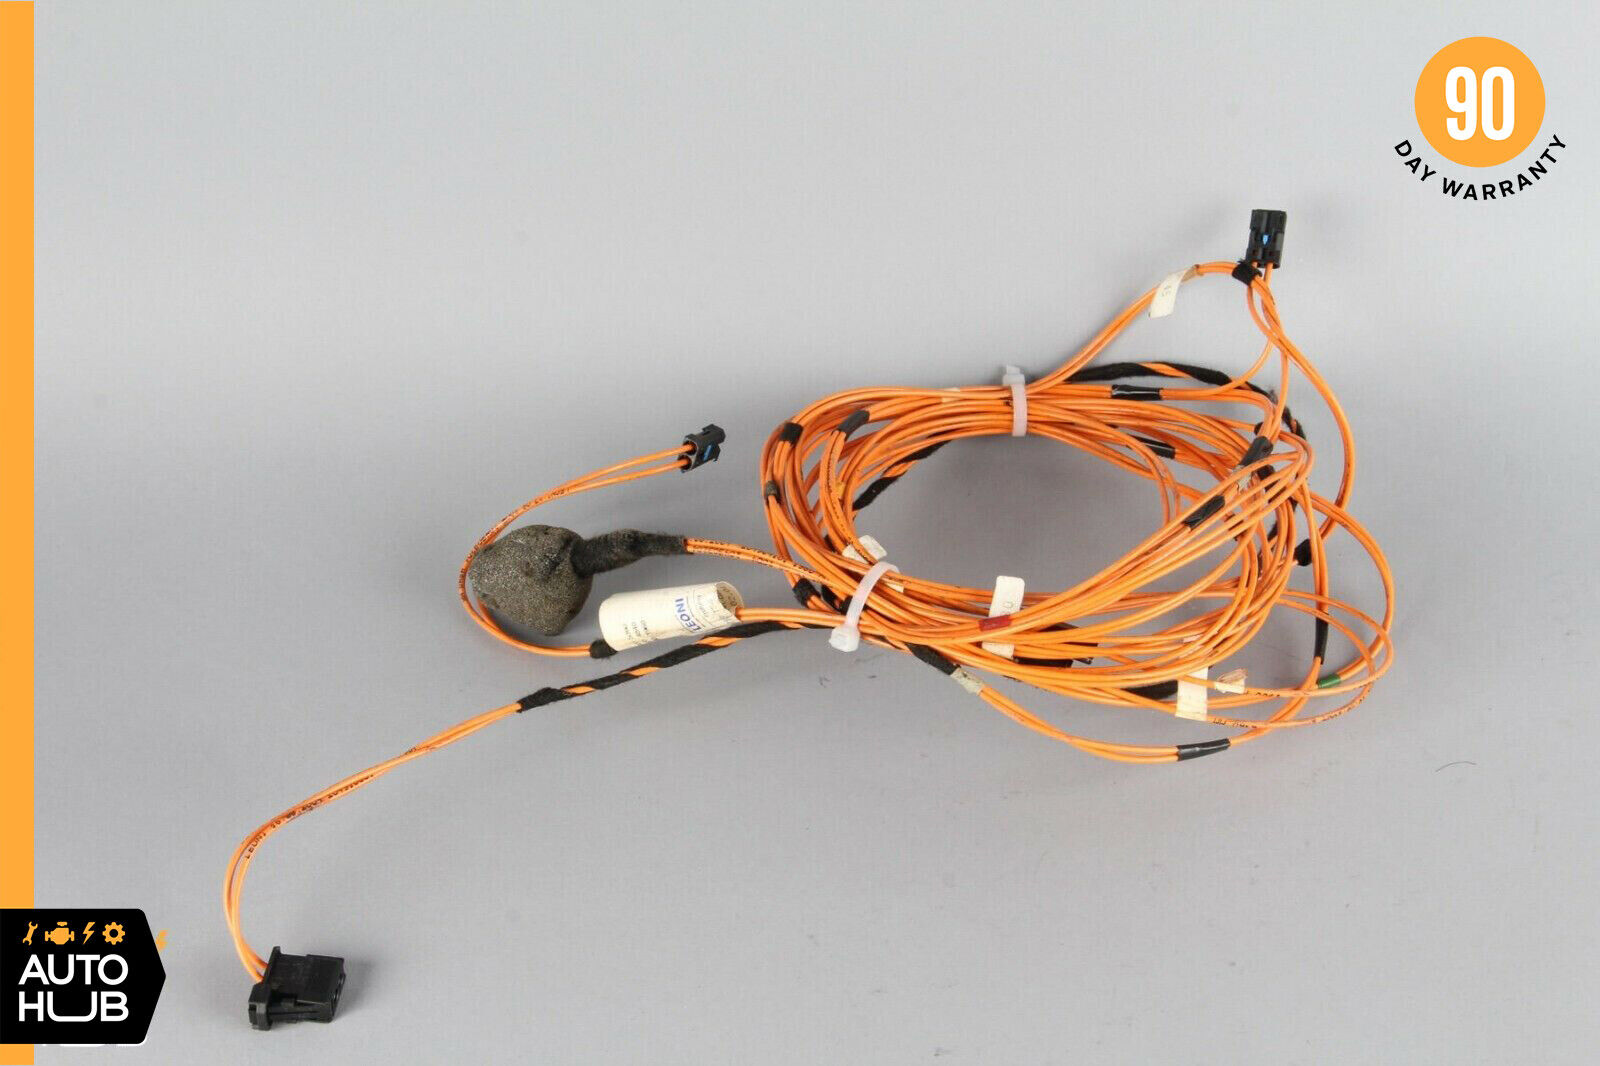 05-09 Mercedes W209 CLK280 CLK550 CLK63 Optic Wire Cable Harness 2095403034 OEM